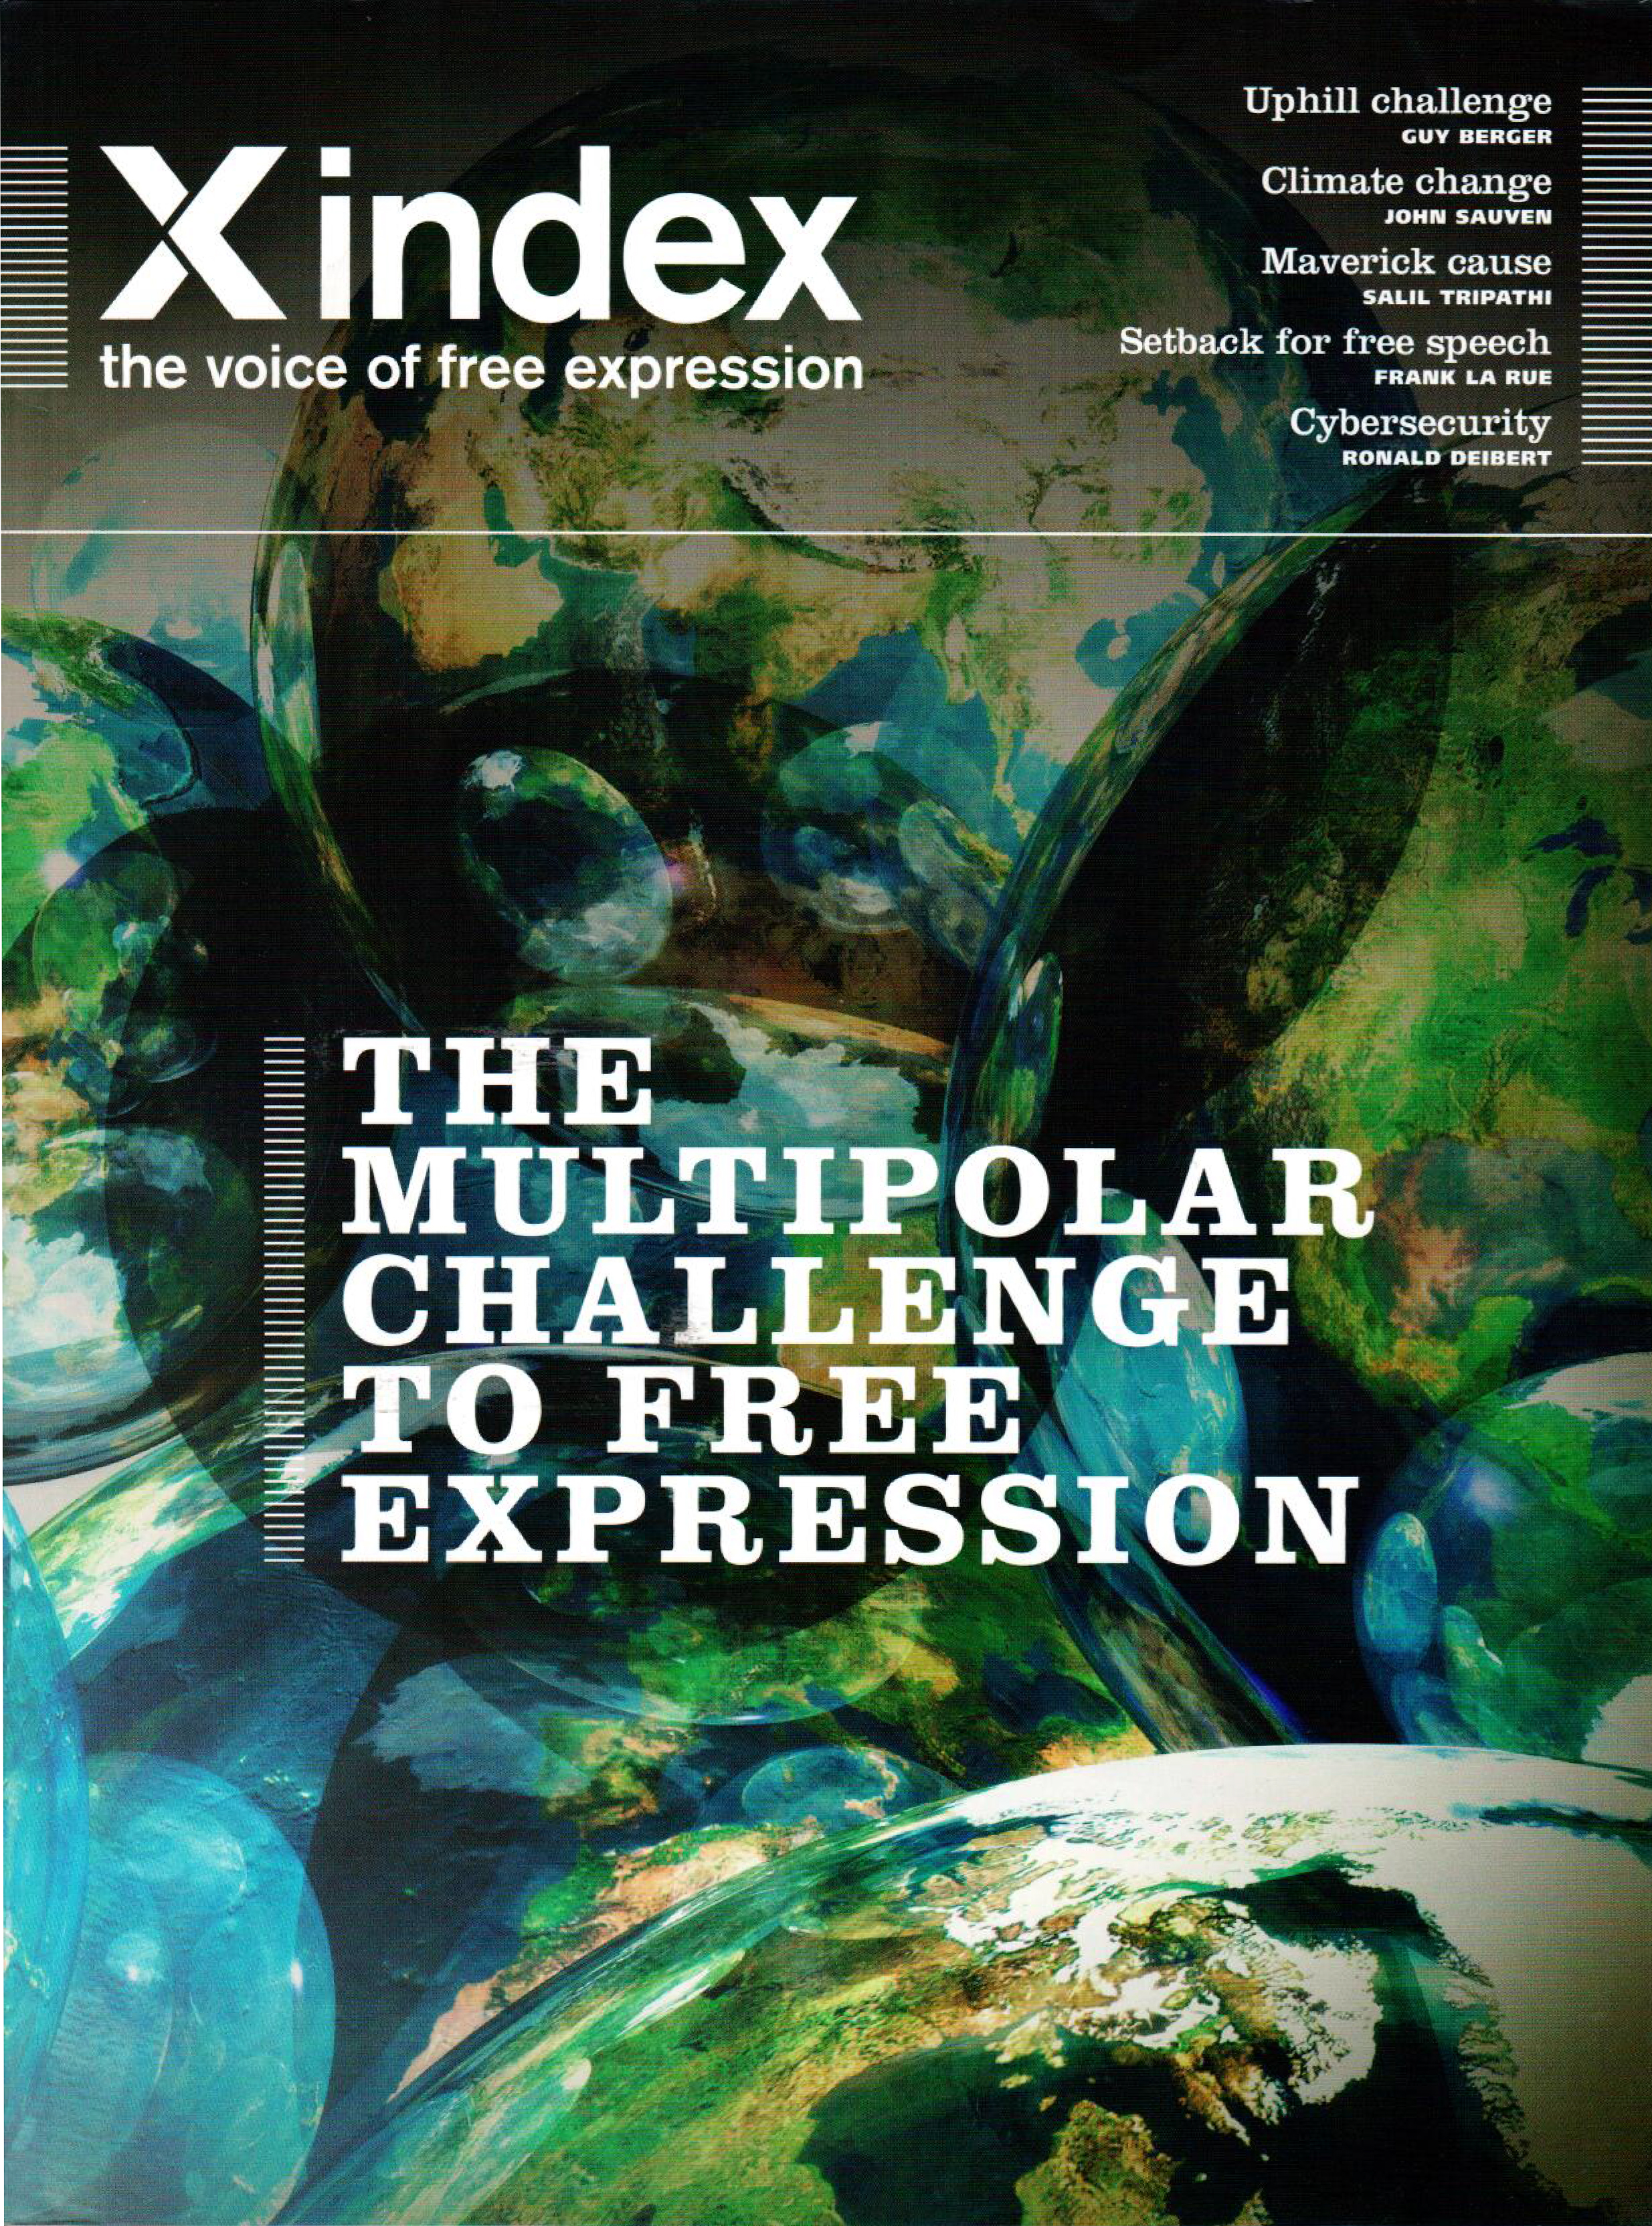 The multipolar challenge to free expression